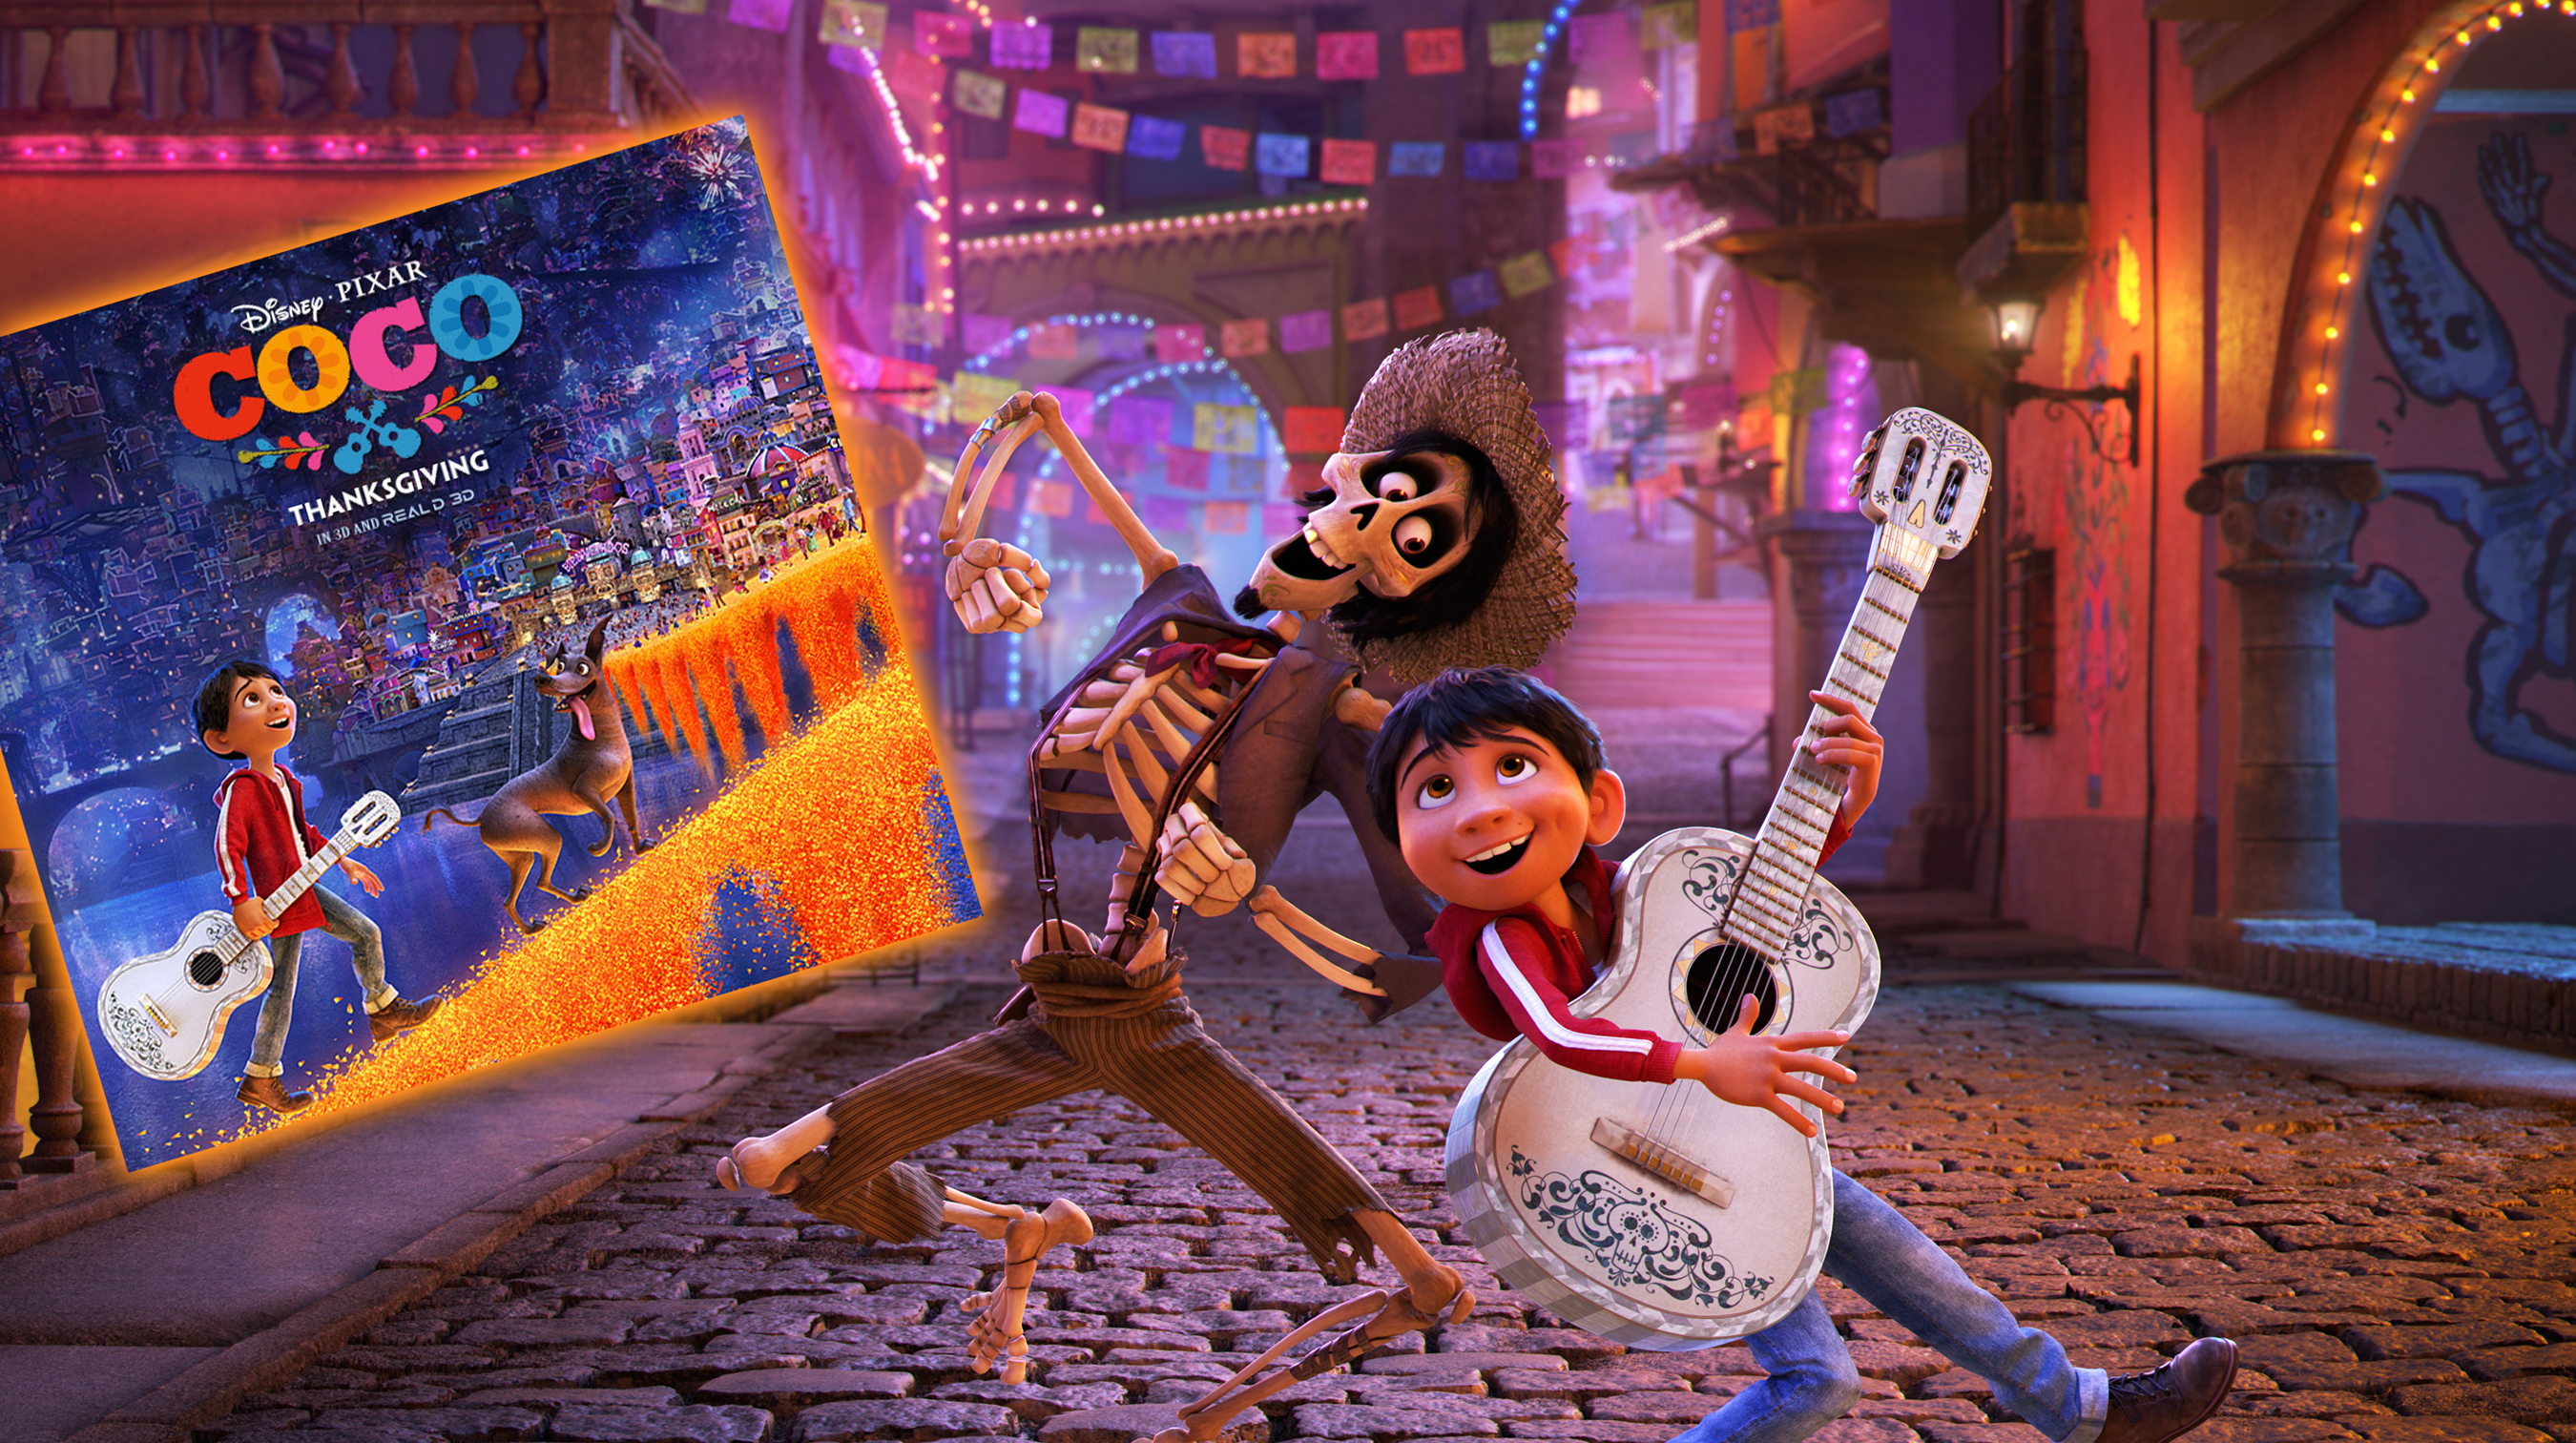 "Coco" Soundtrack Available Today Album Featuring Original Songs And Traditional Mexican Sounds